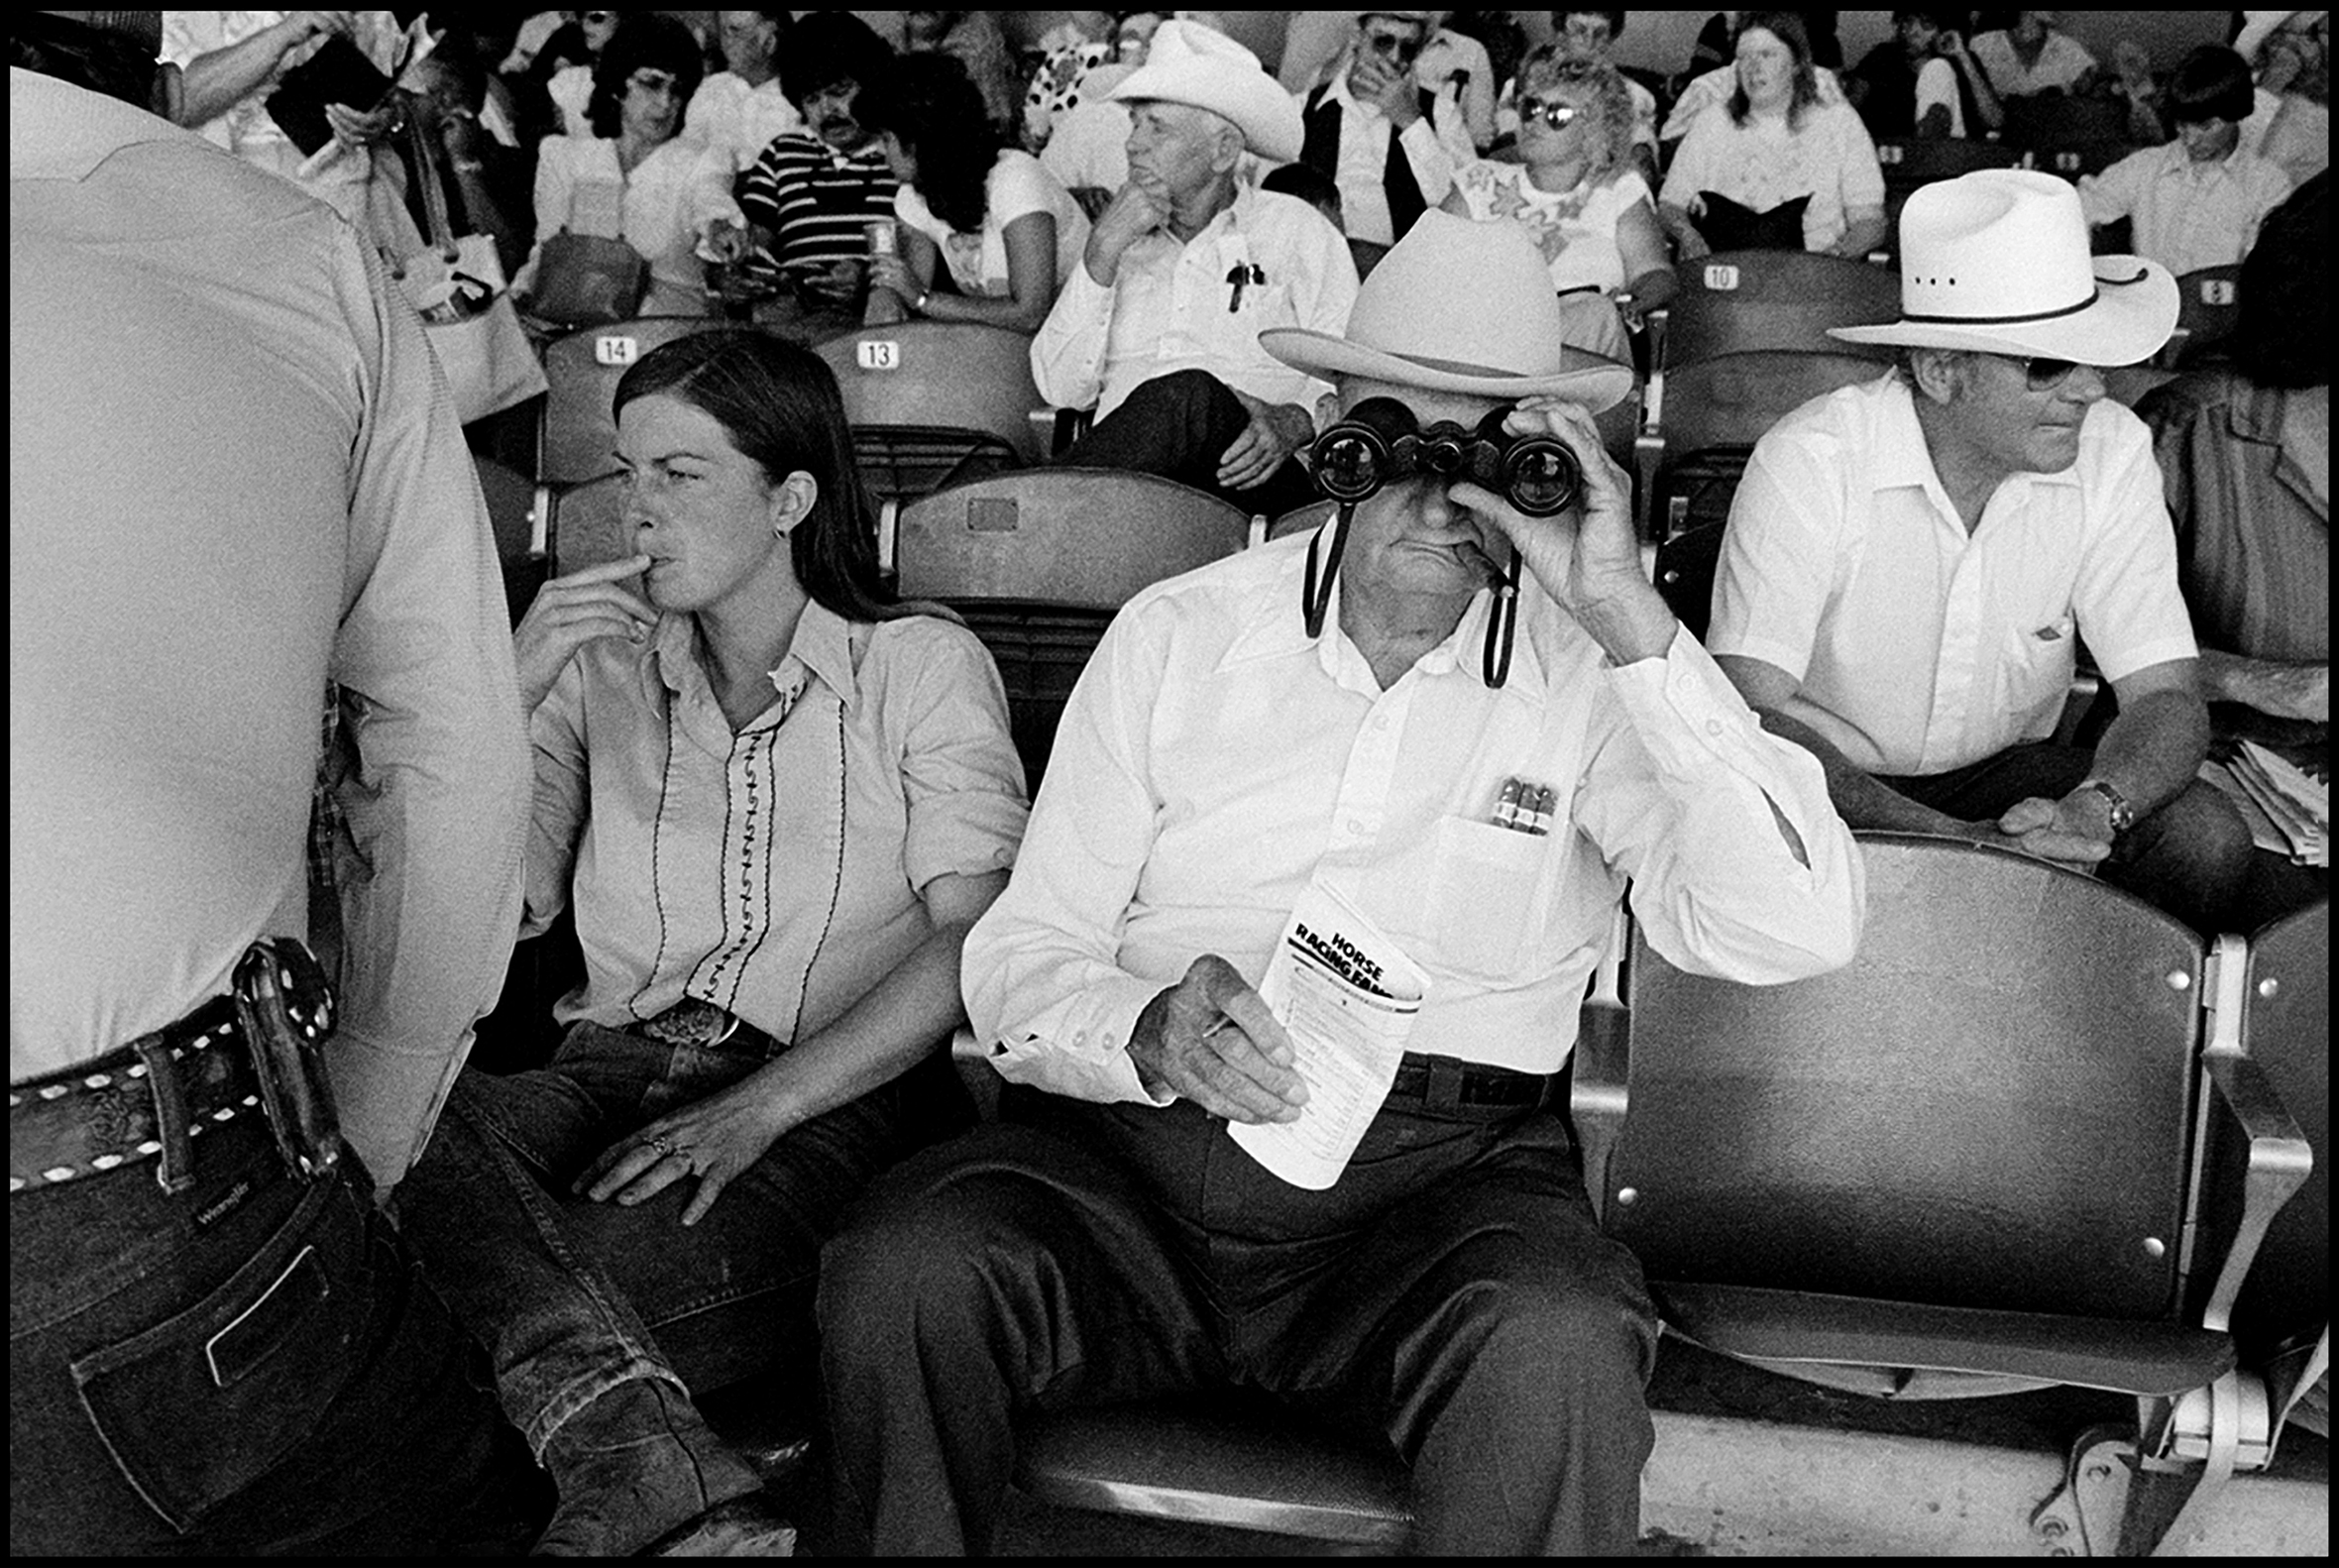 Racetrack goers sit in the stands at the Downs at Santa Fe between races. In the foreground a man and woman sit together. She looks to the side. He looks ahead through binoculars. He has a cigar in his mouth and a racing form and pen in his hand.